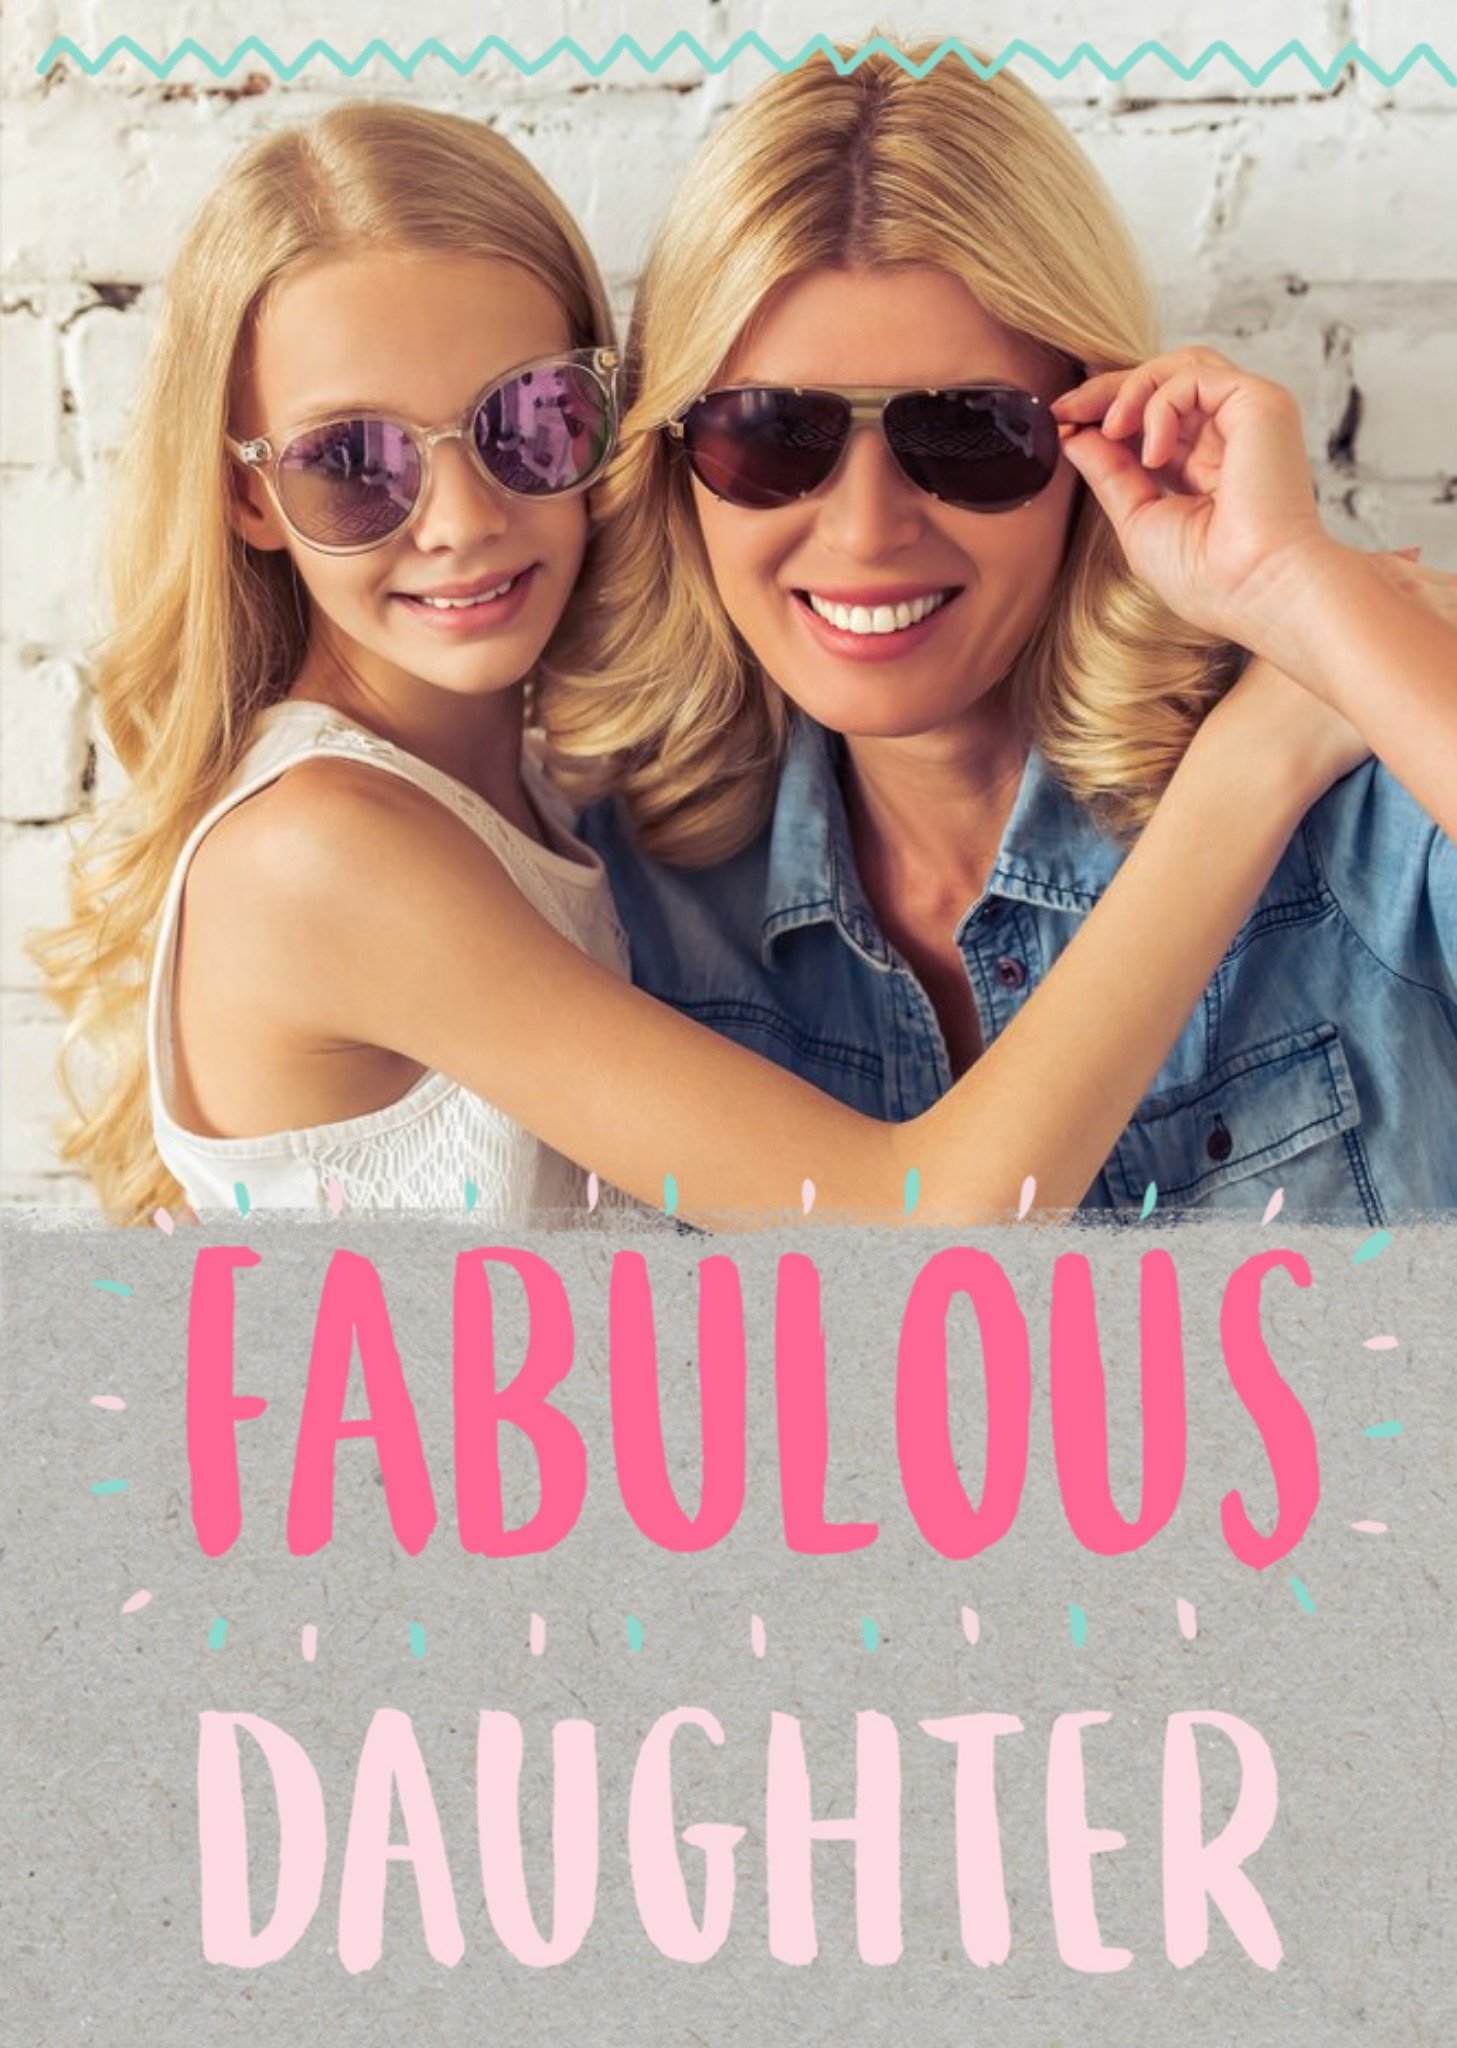 Moonpig Neon Letters Fabulous Daughter Photo Card, Large